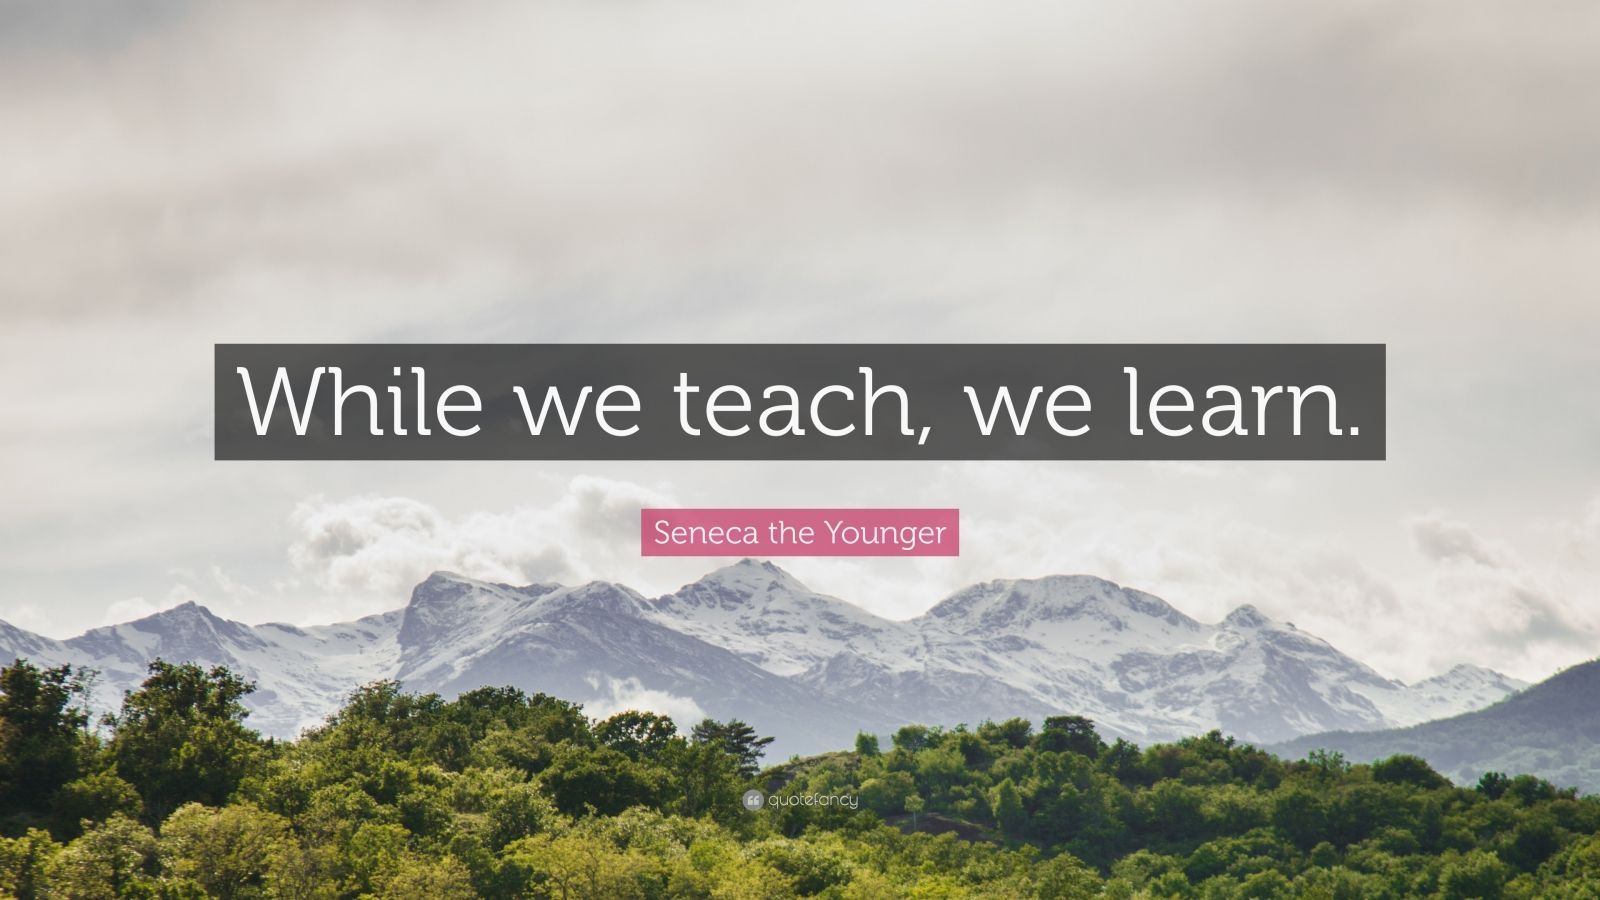 Quote from the ancient philosoopher Seneca: "when we teach we learn"